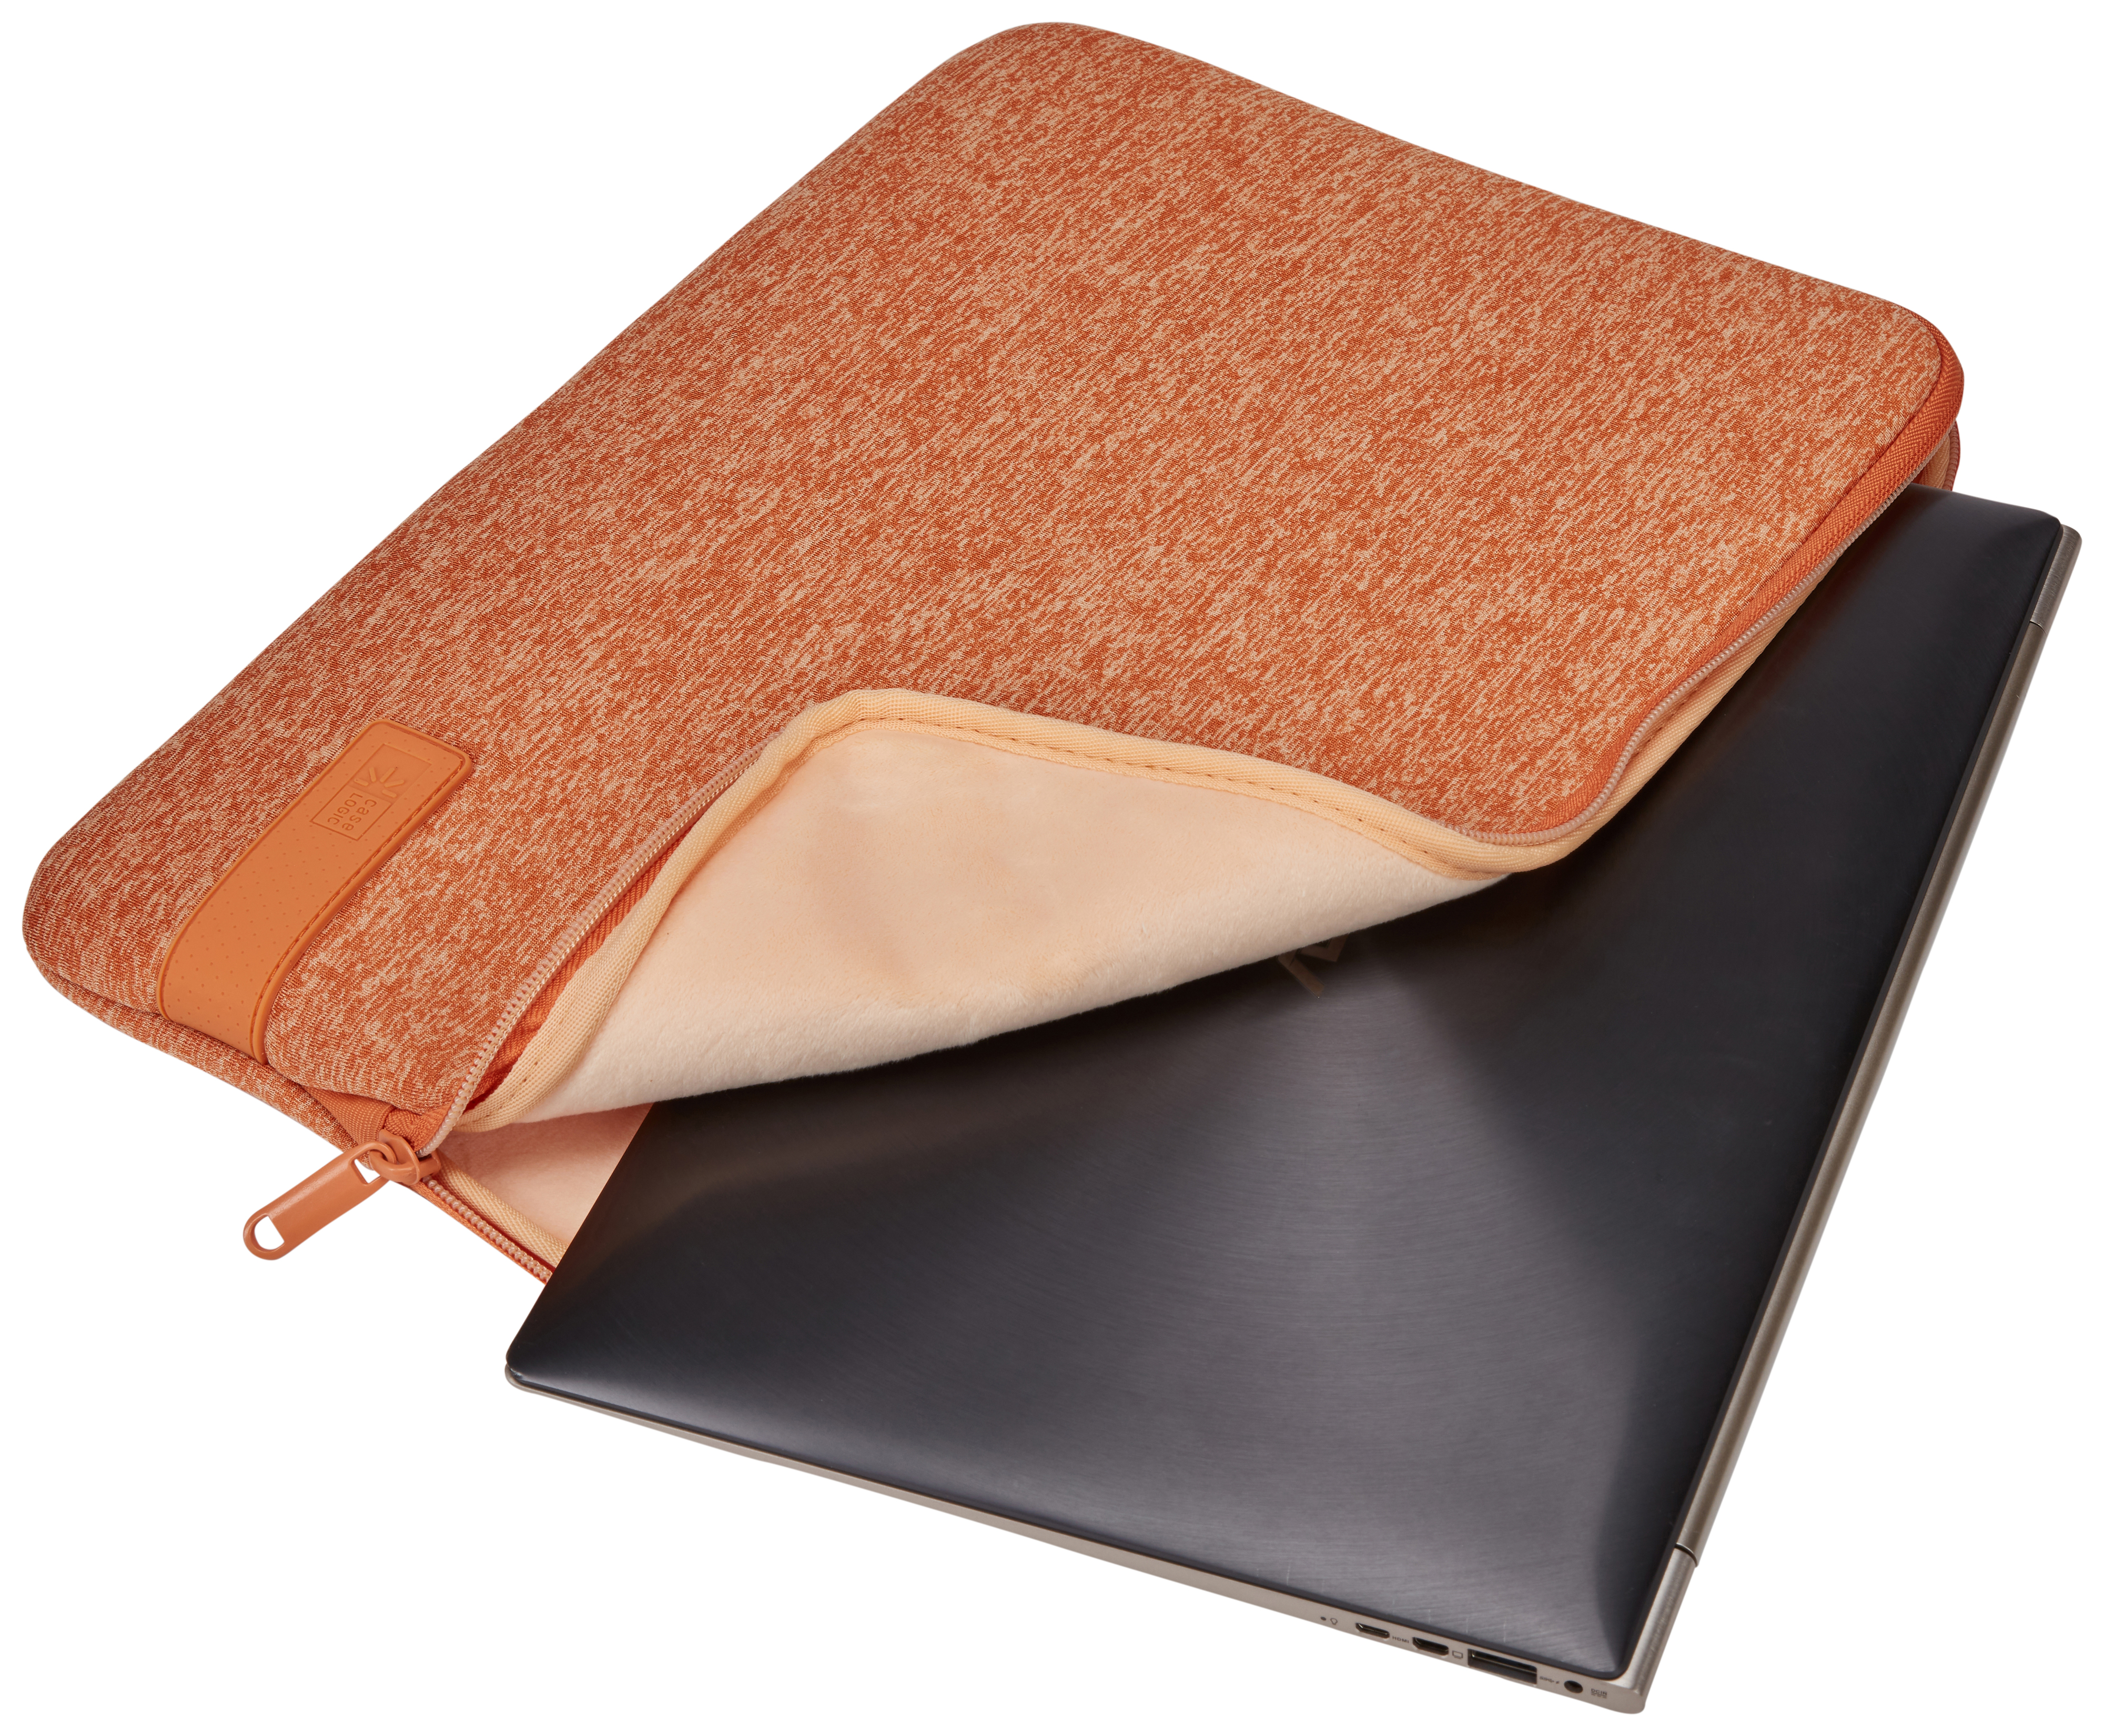 CASE LOGIC Reflect Notebook Sleeve Sleeve Polyester, Coral für Gold/Apricot Universal